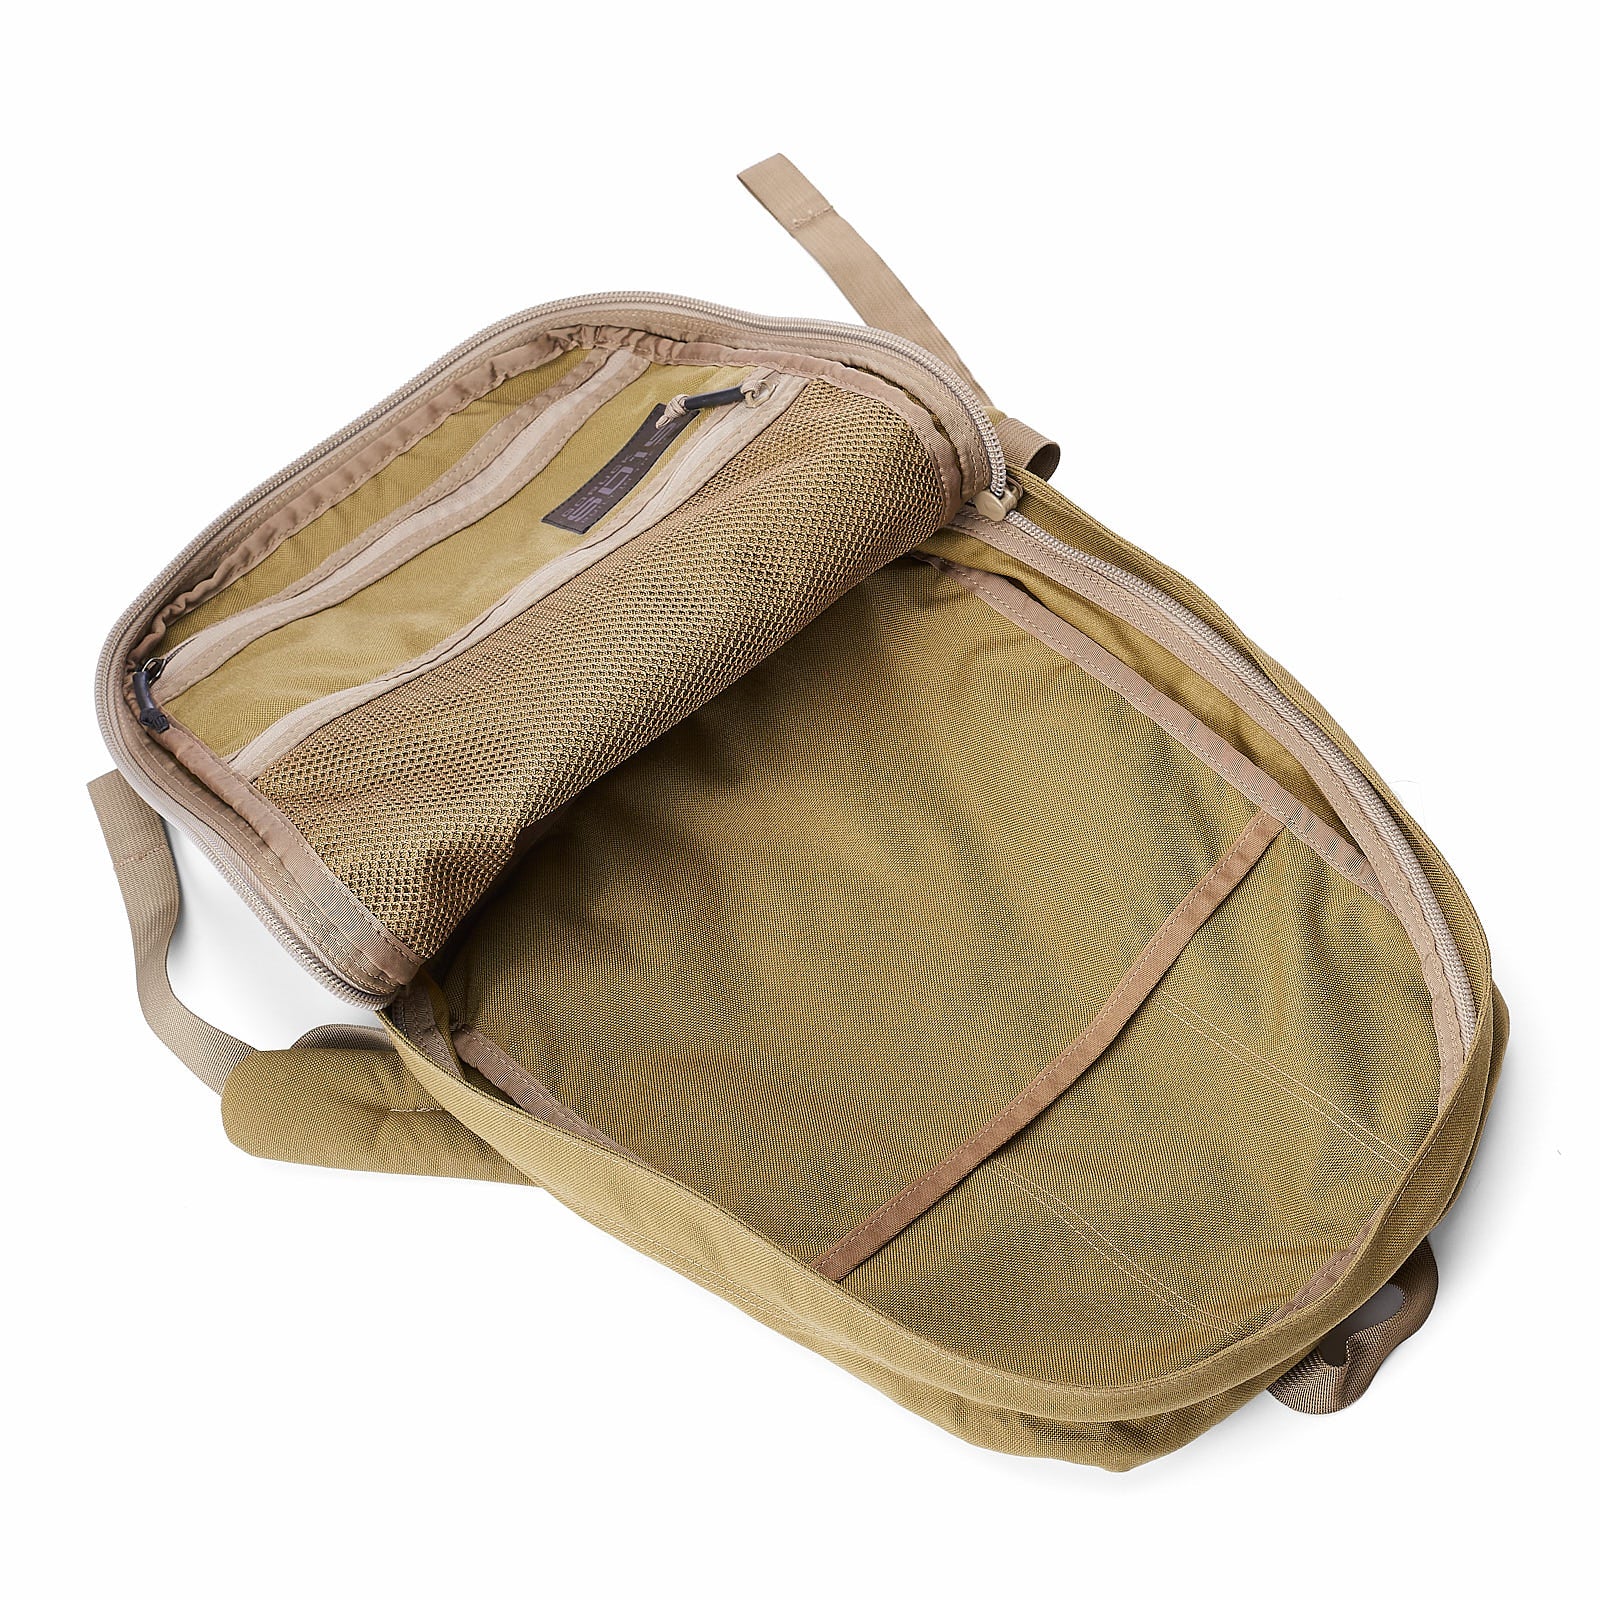 GORUCK SD15 Shadow Ruck Soft Coyote Backpack Bag 15L Discontinued Daybag GORUCK